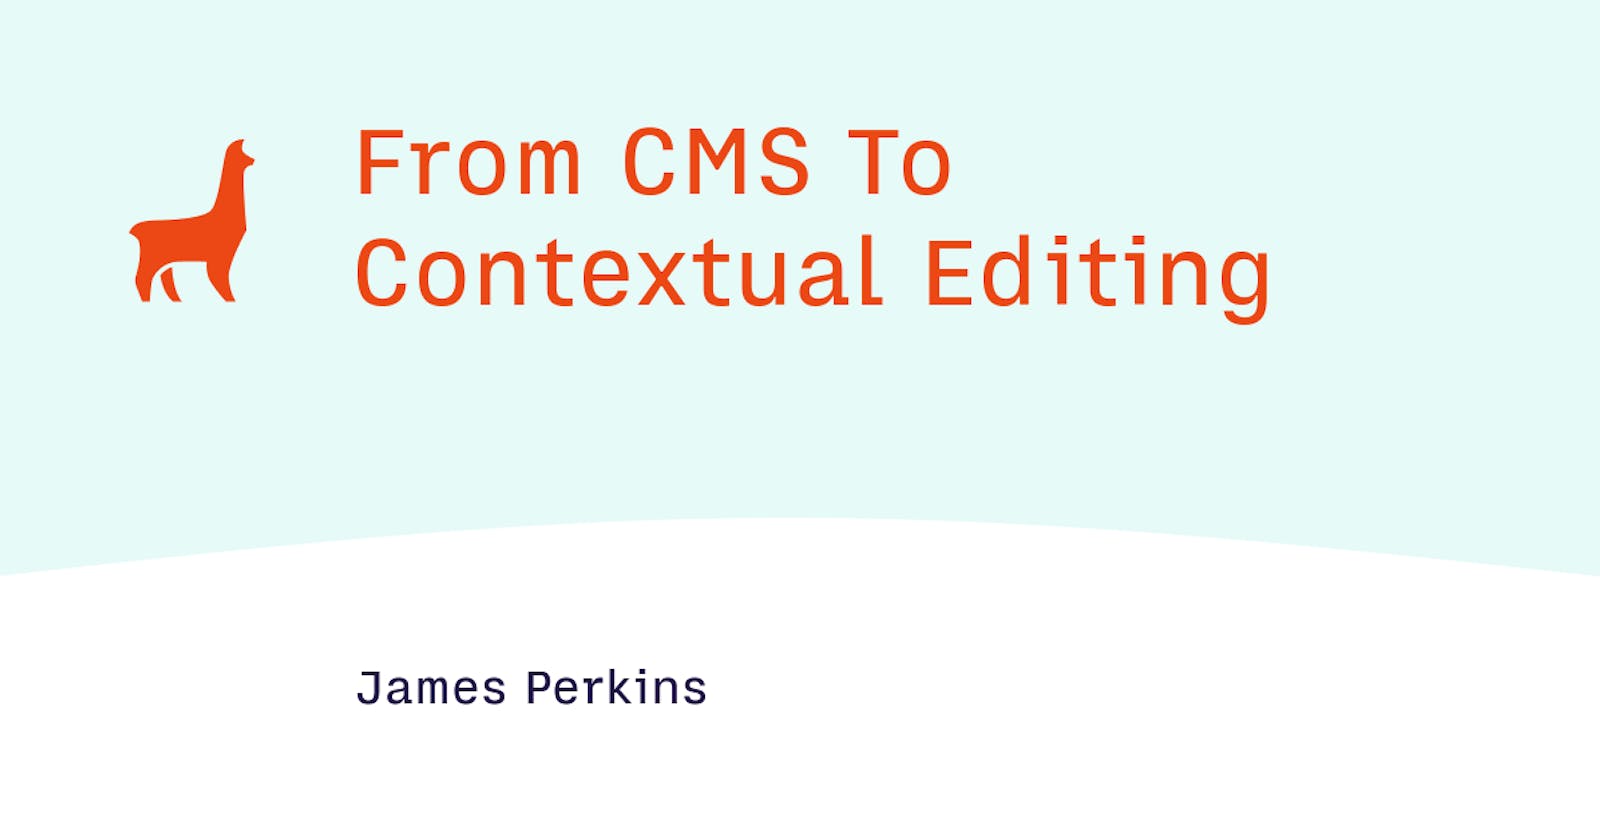 From CMS To Contextual Editing